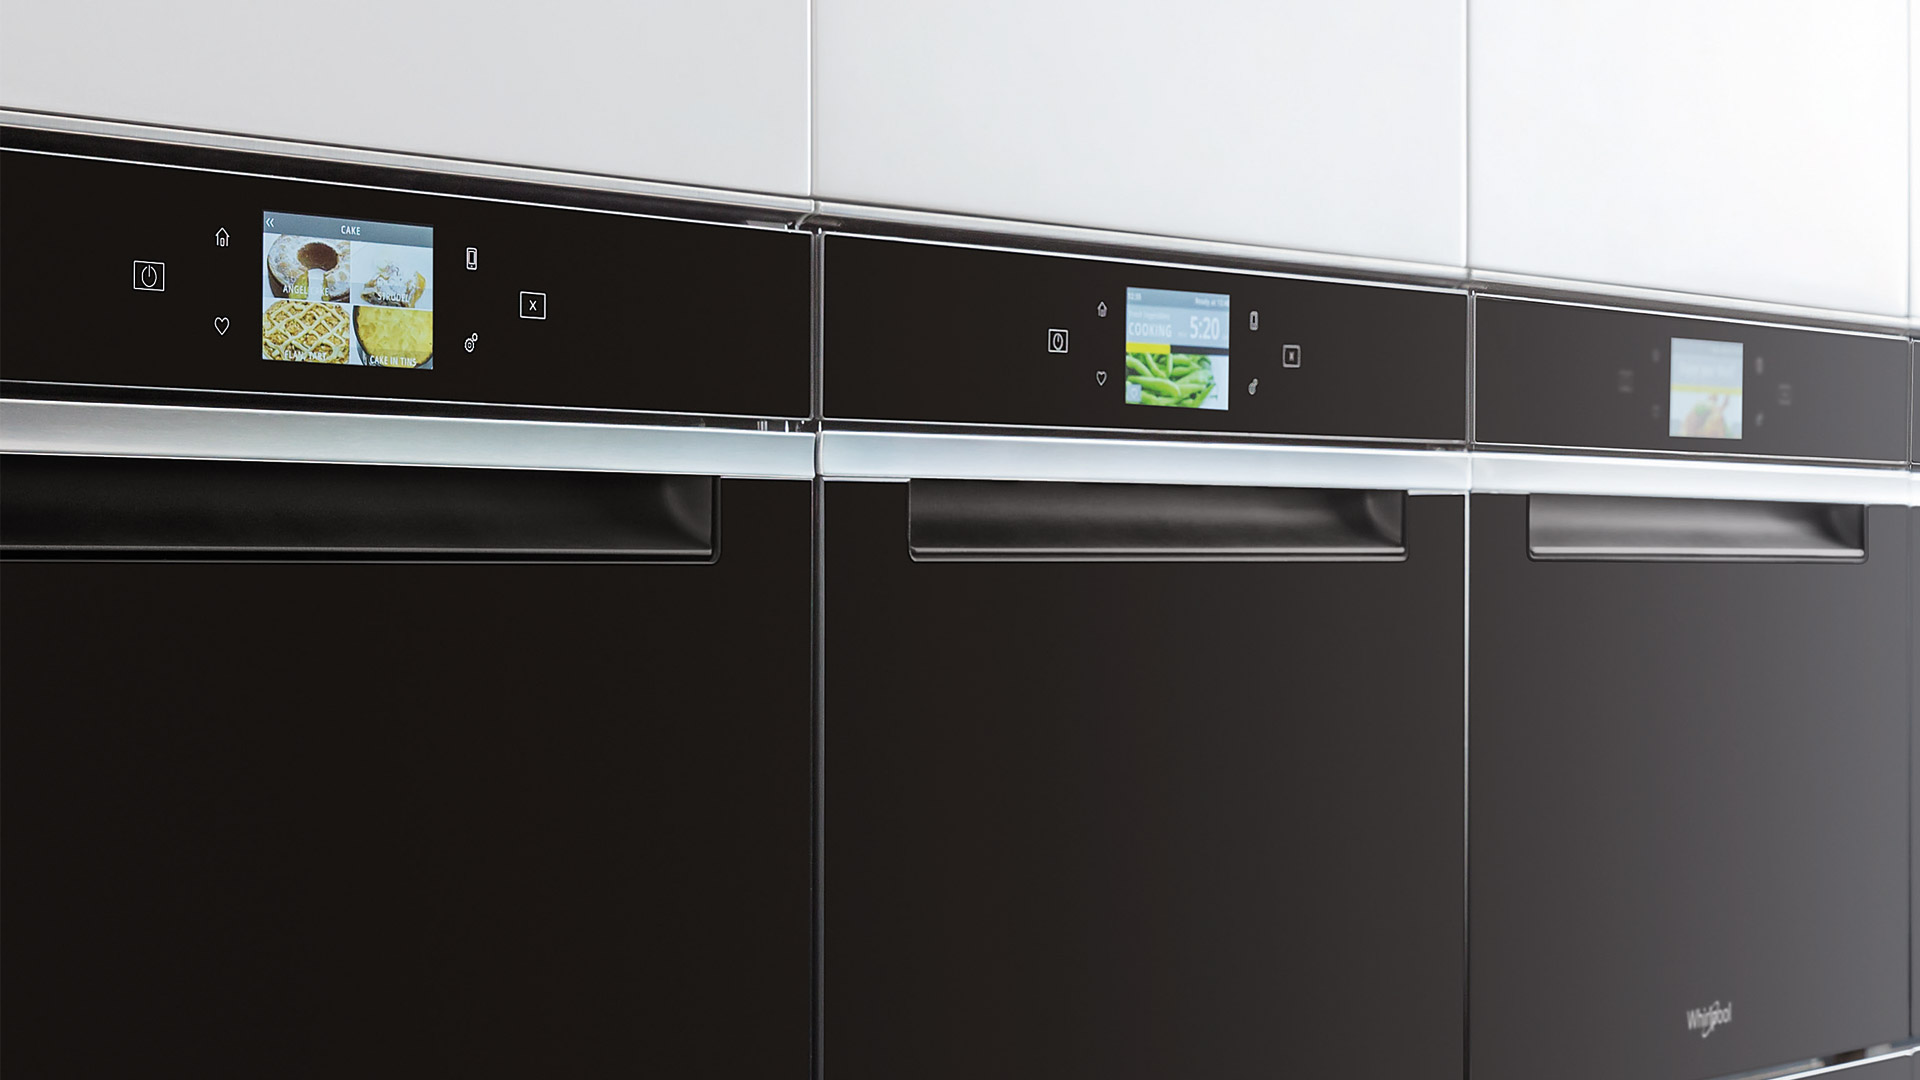 Intuitiveness, technology and design in the kitchen with the W Collection by Whirlpool